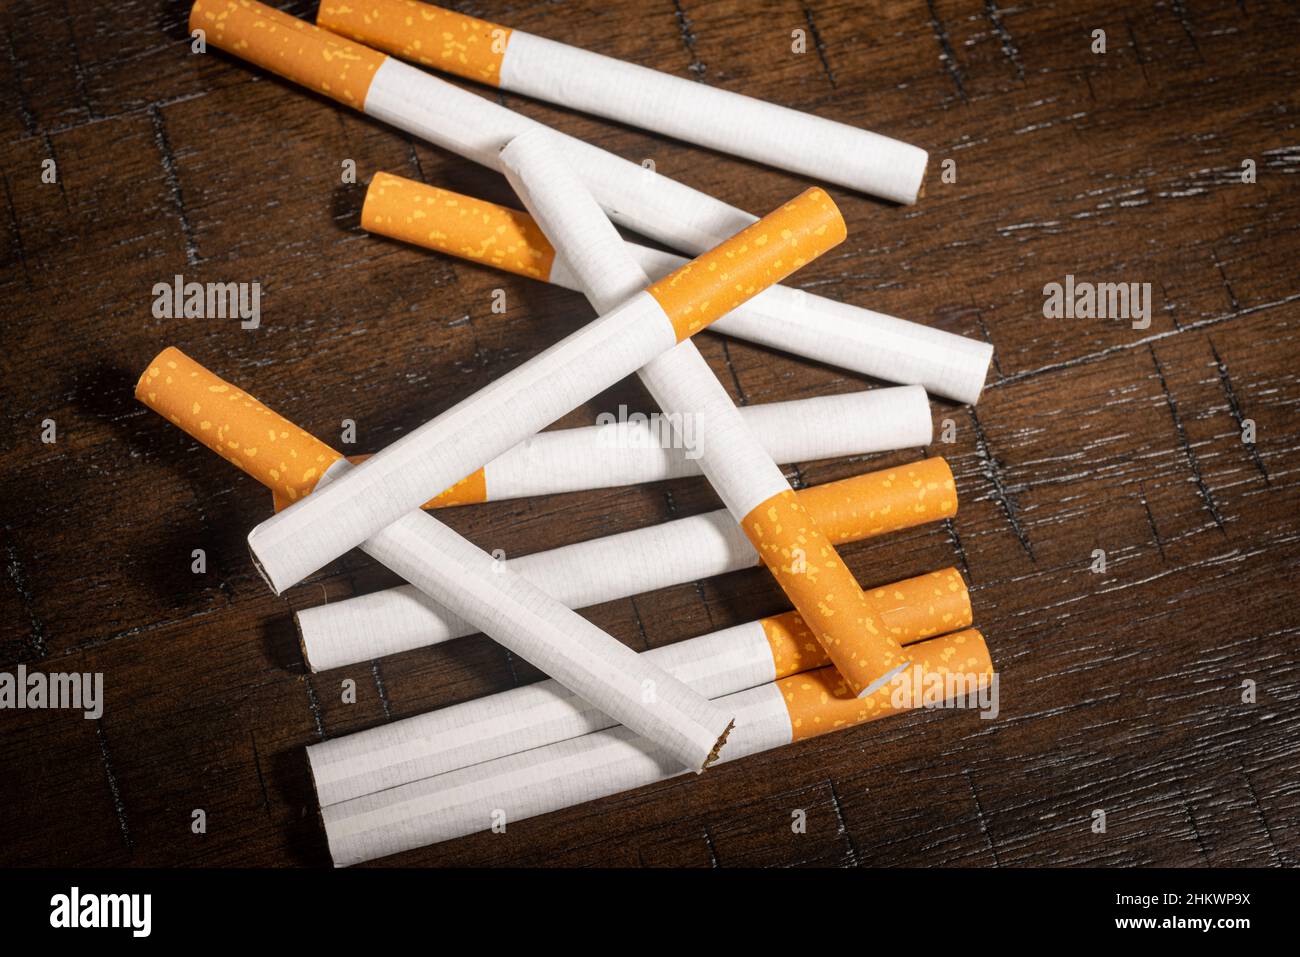 A small pile of loose cigarettes sits on a wooden table. Stock Photo